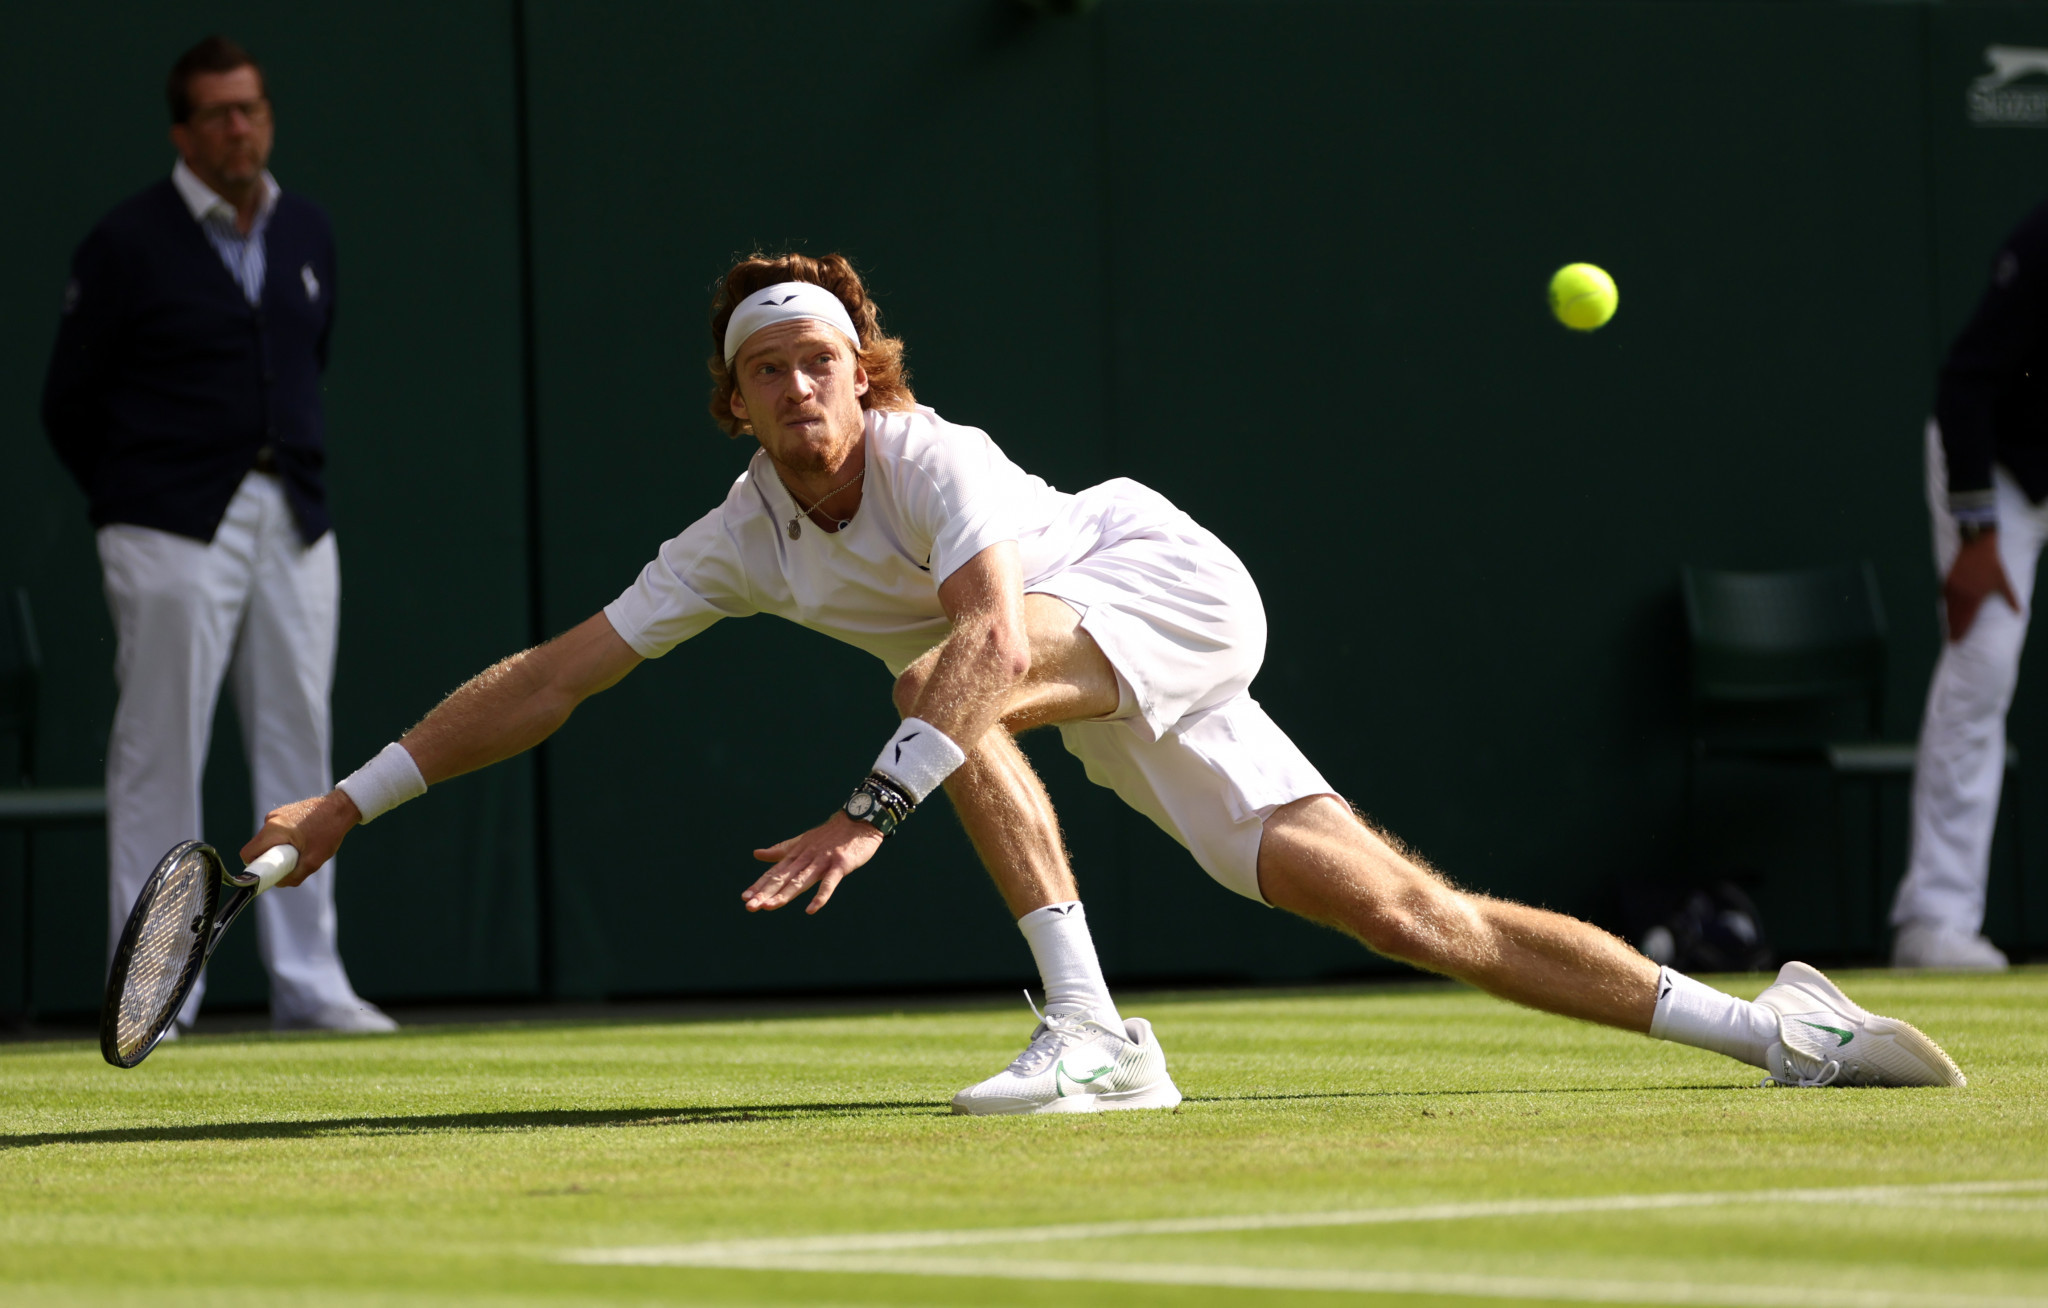 Andrey Rublev made a spectacular diving winner with what proved to be the penultimate point of a five-set win over Alexander Bublik ©Getty Images